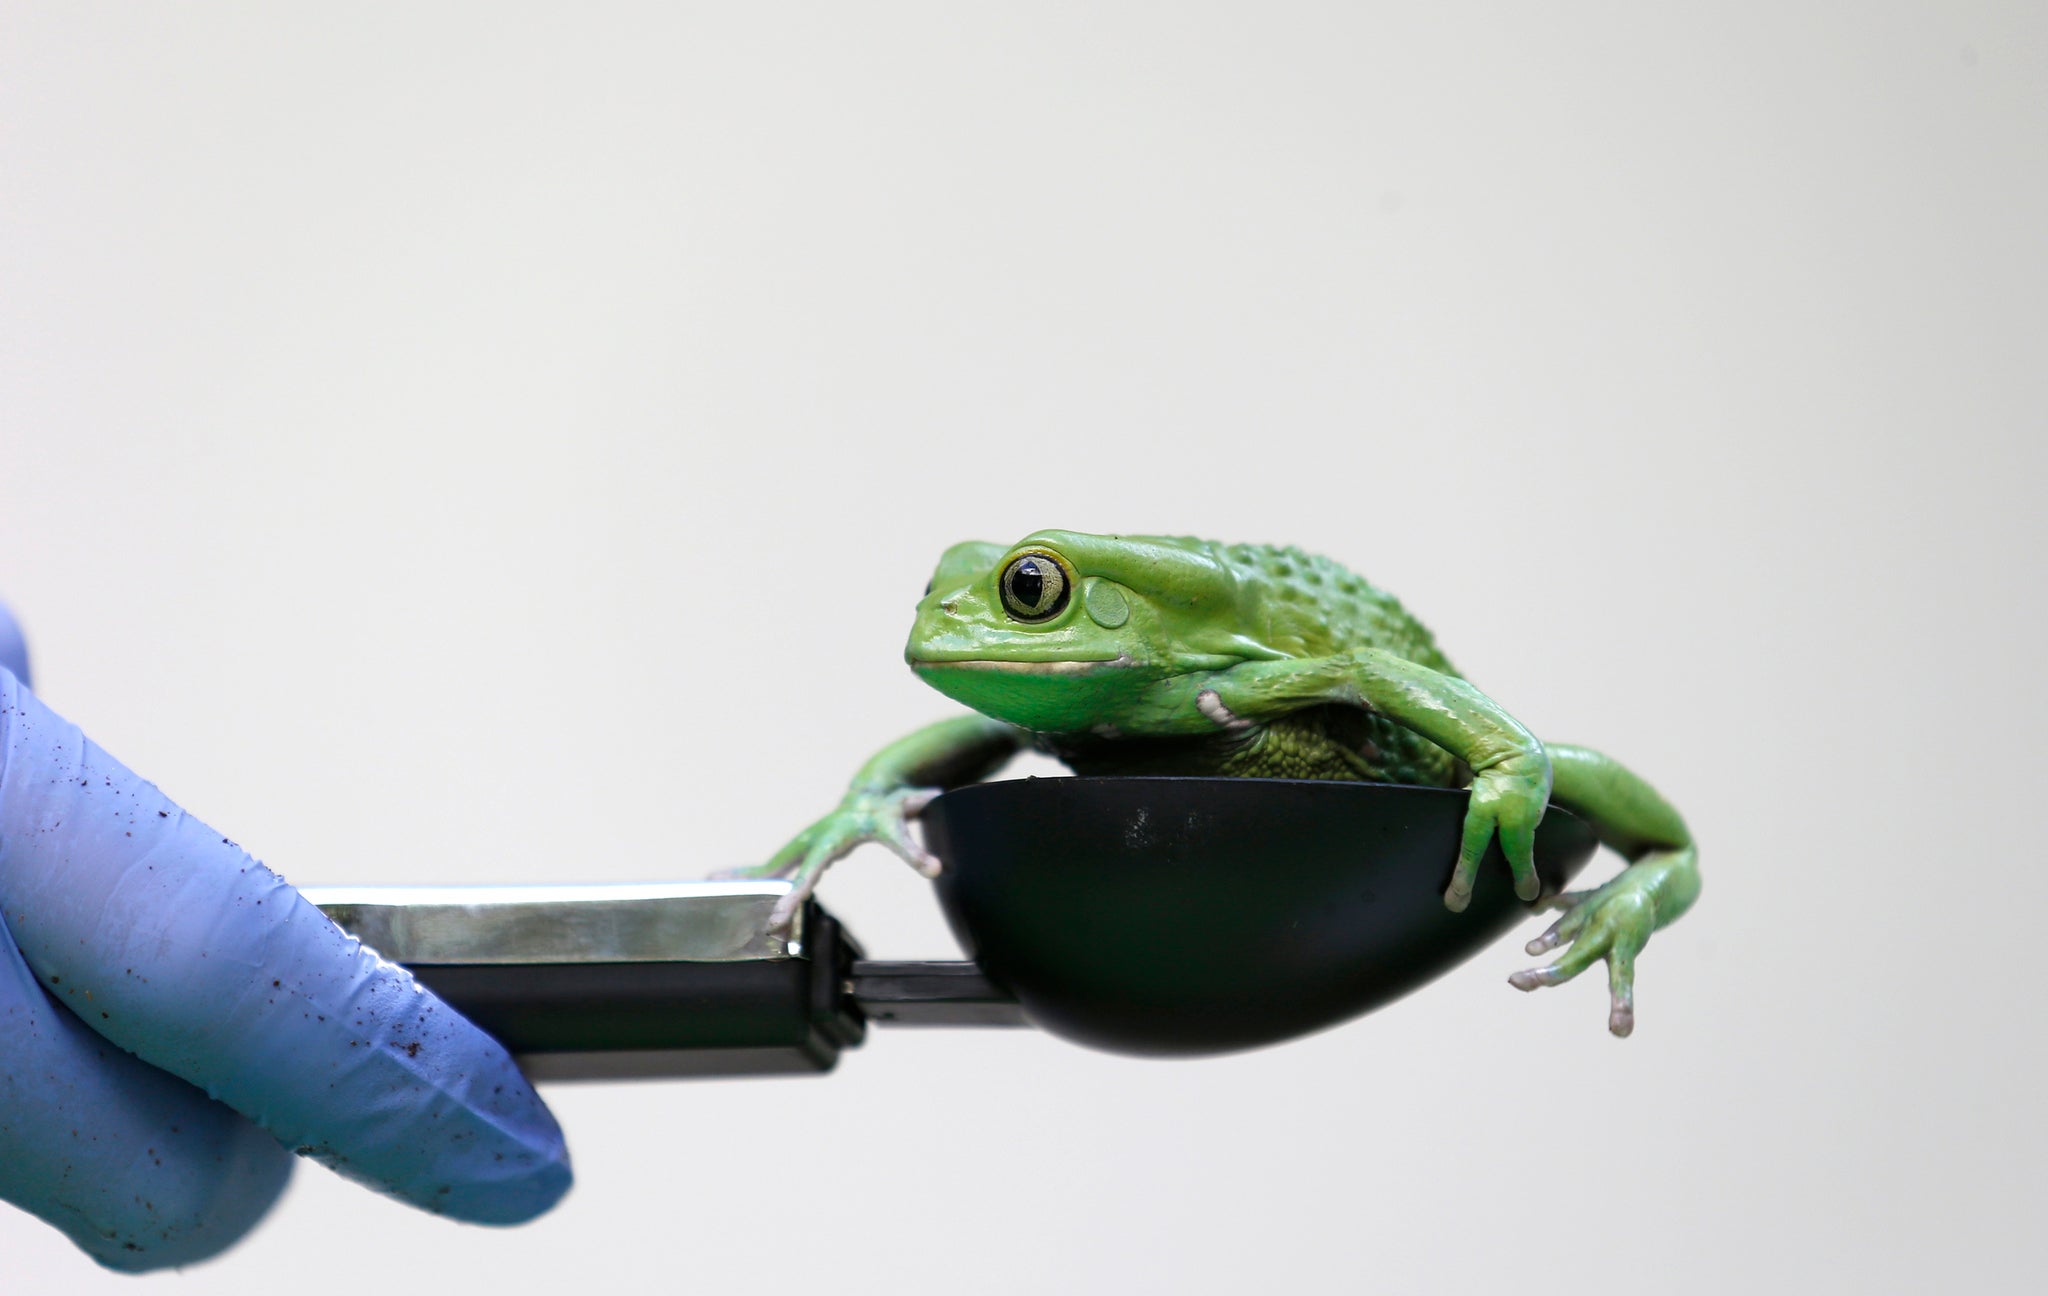 A waxy monkey tree frog - not a burrowing frog - is weighed at London Zoo.